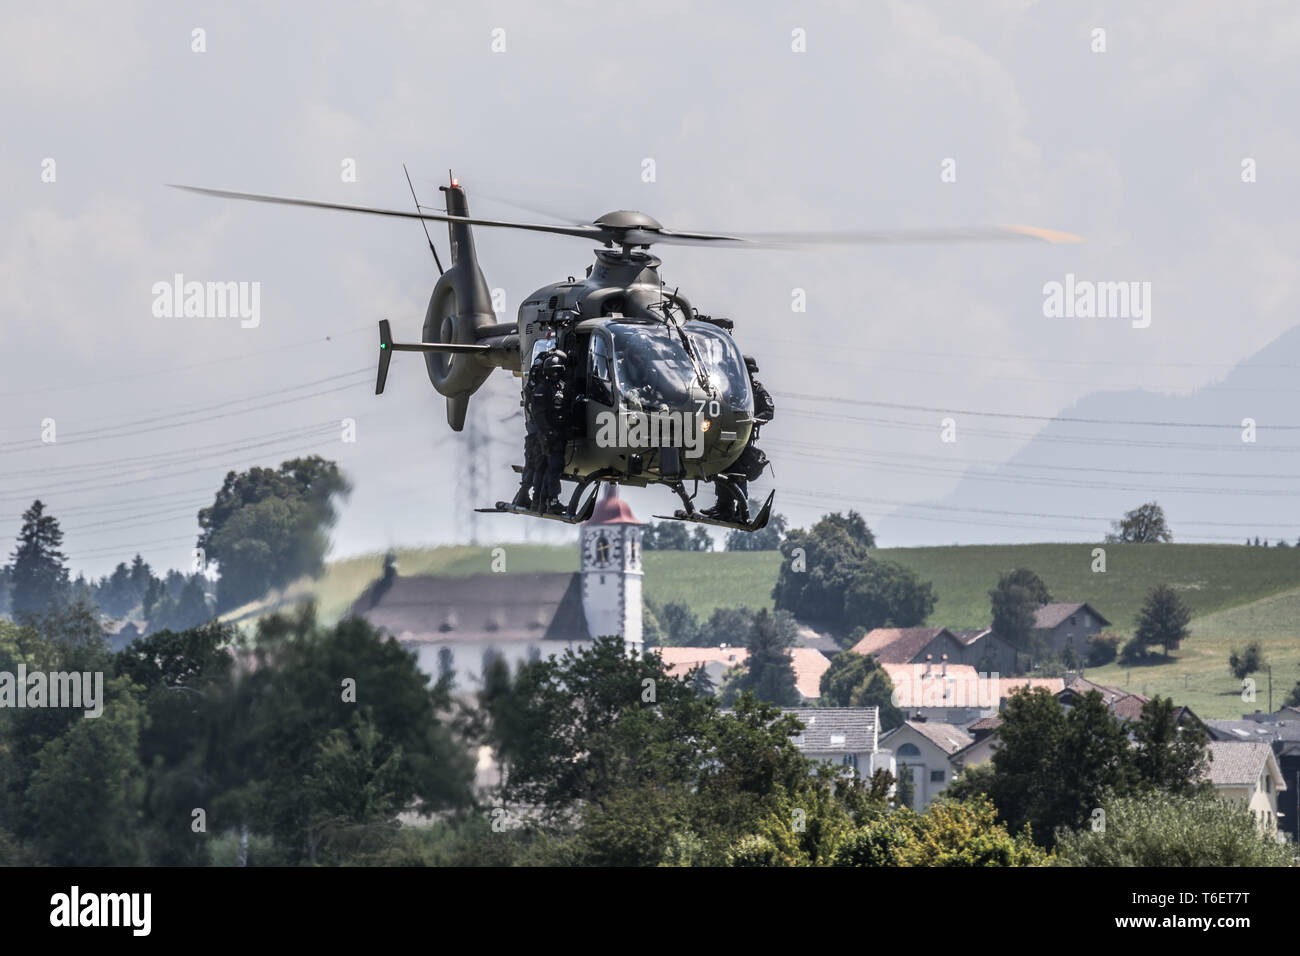 Special unit lynx of the Lucerne police during an exercise, Beromünster, Lucerne, Switzerland, Europ Stock Photo